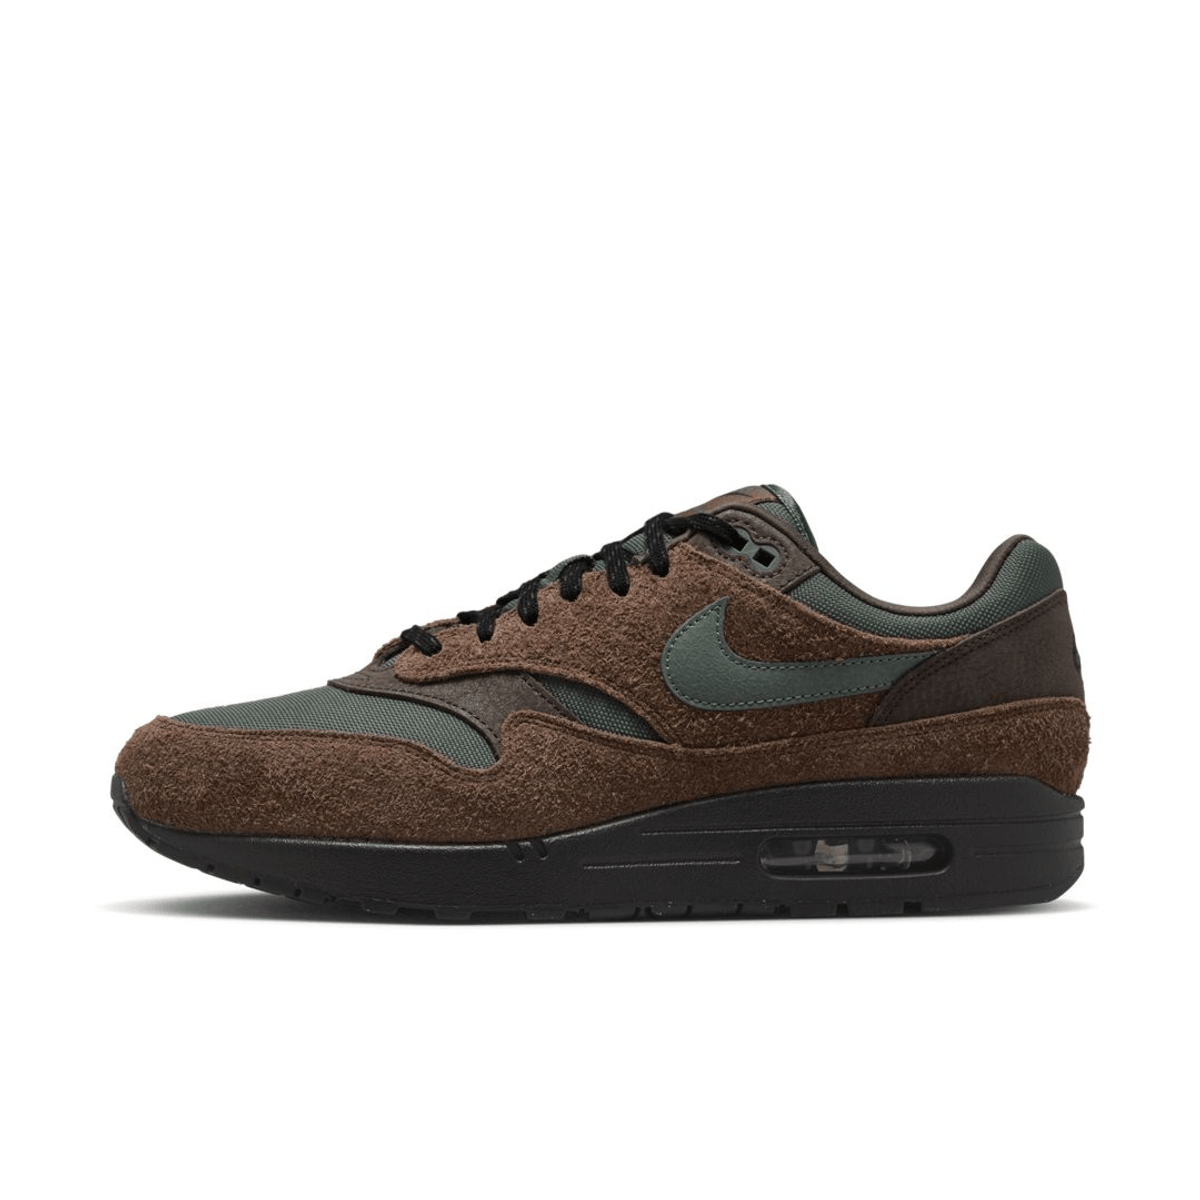 Official Look At The Nike Air Max 1 “Beef & Broccoli”